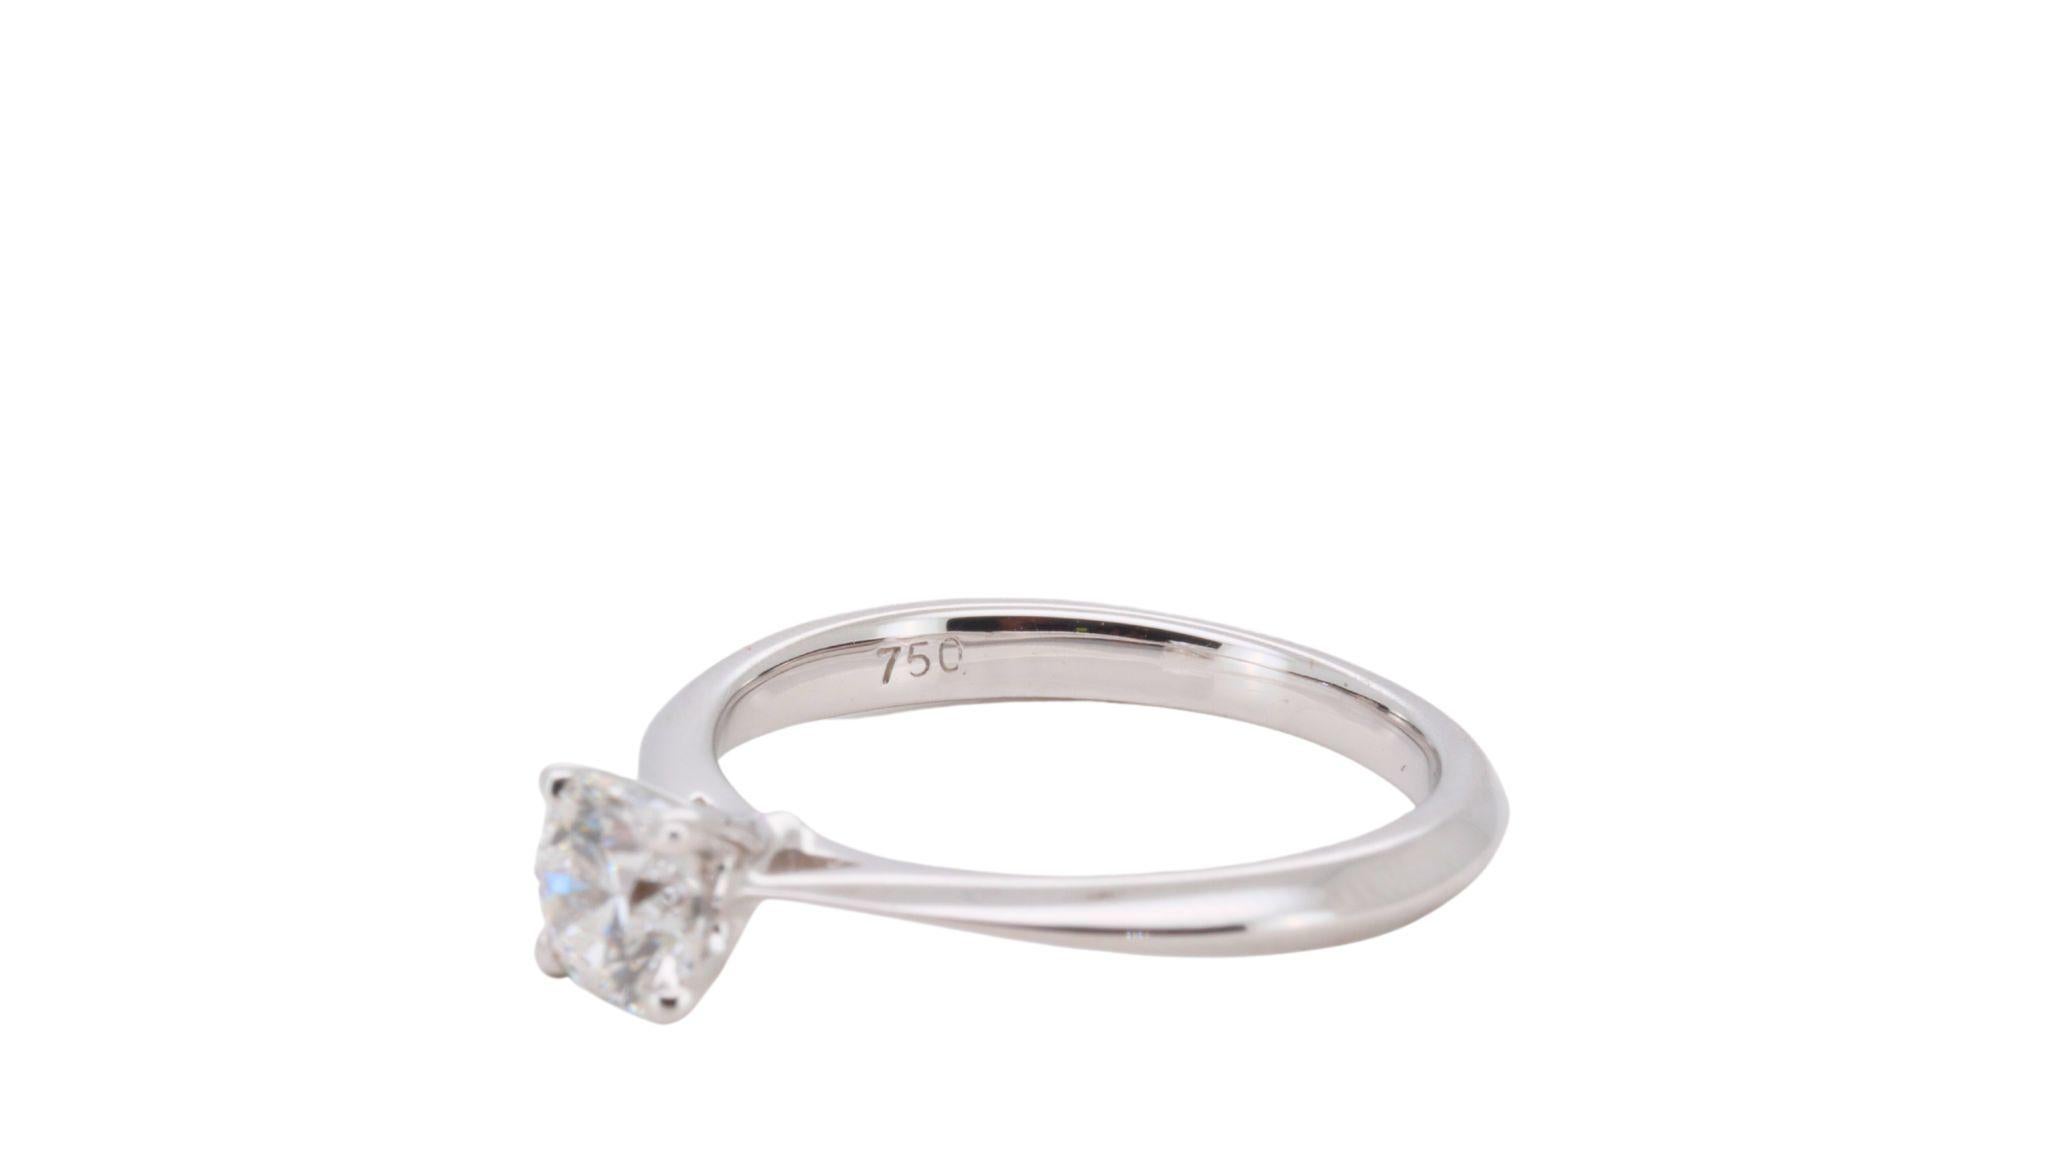 Marvelous 18k White Gold Solitaire Ring w/ 0.47 Carat Natural Diamonds AGS Cert For Sale 3